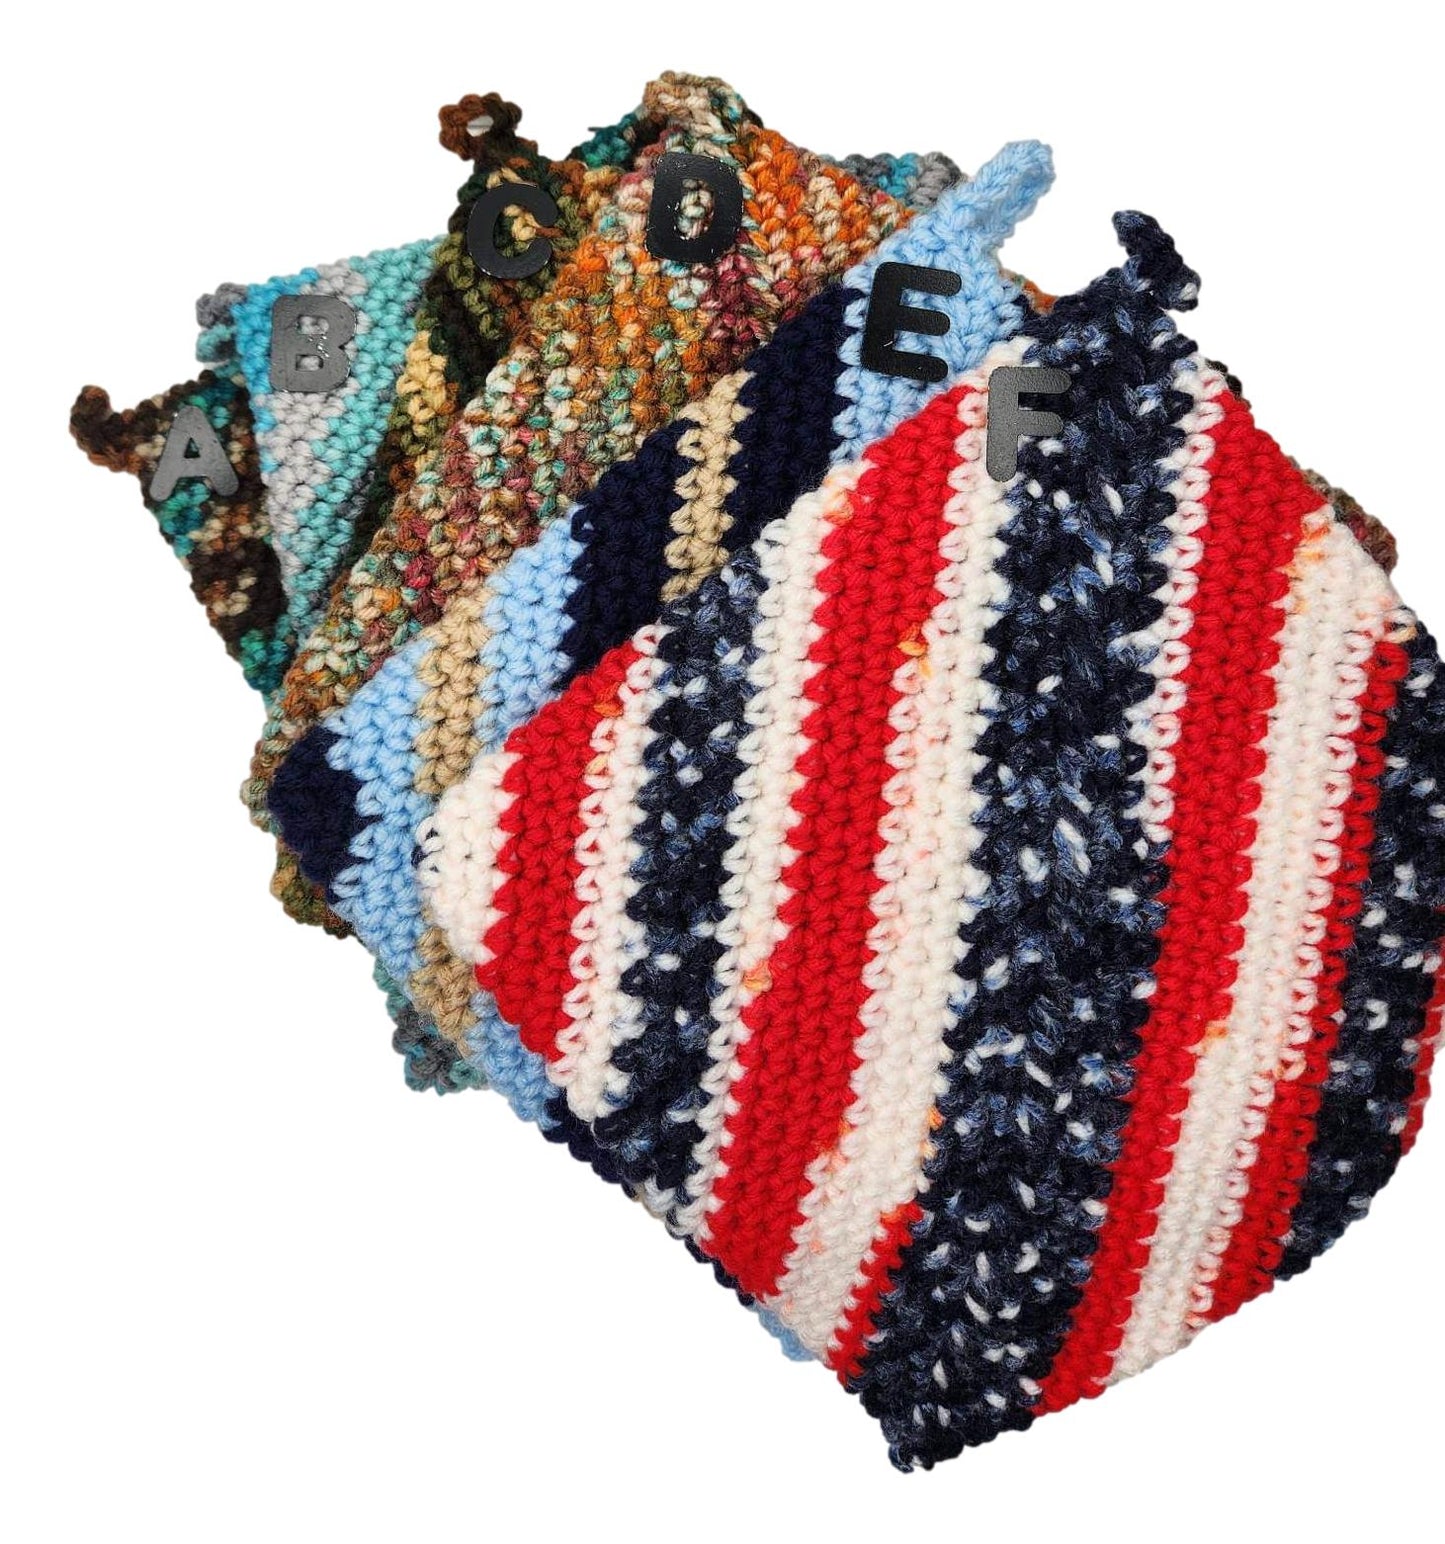 Pot Holders Knit Single XL Handwoven by New Mexico Artist 8 L x 8 W Inches - Ysleta Mission Gift Shop- VOTED 2022 El Paso's Best Gift Shop